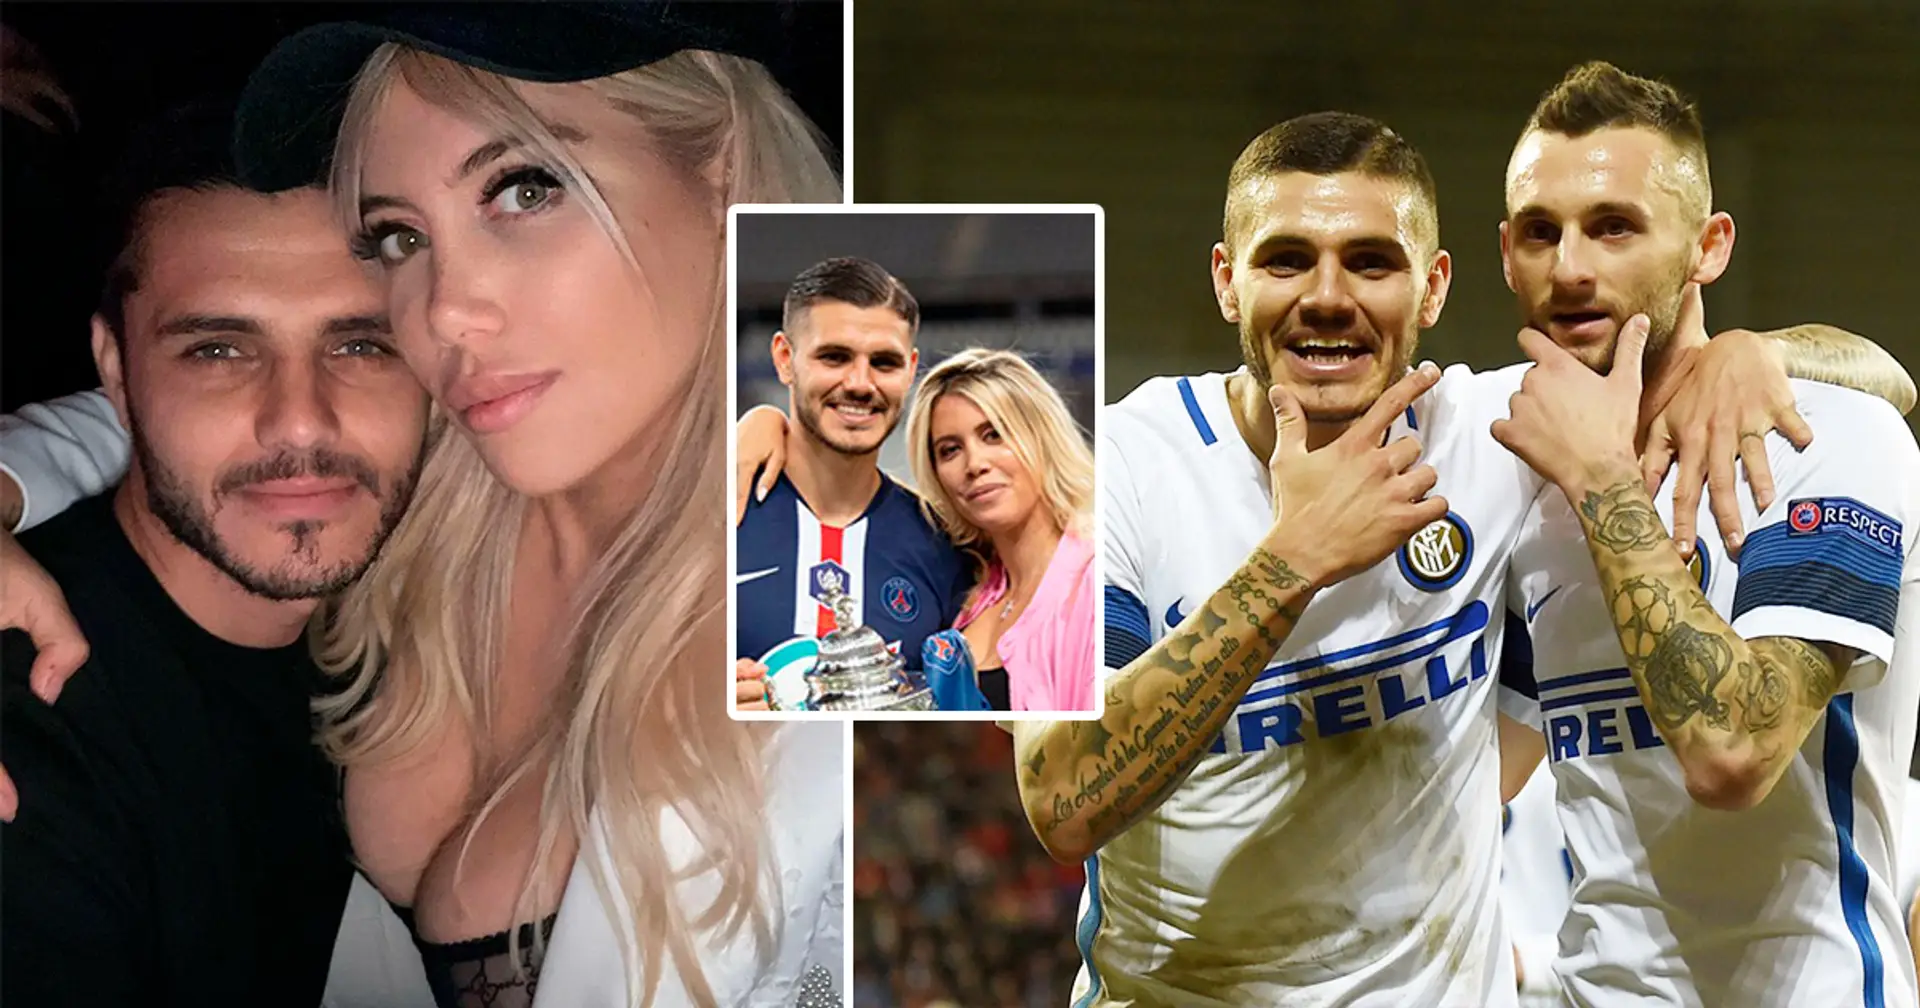 Icardi's wife accused of having an affair with former teammate Brozovic, Wanda finally speaks out 